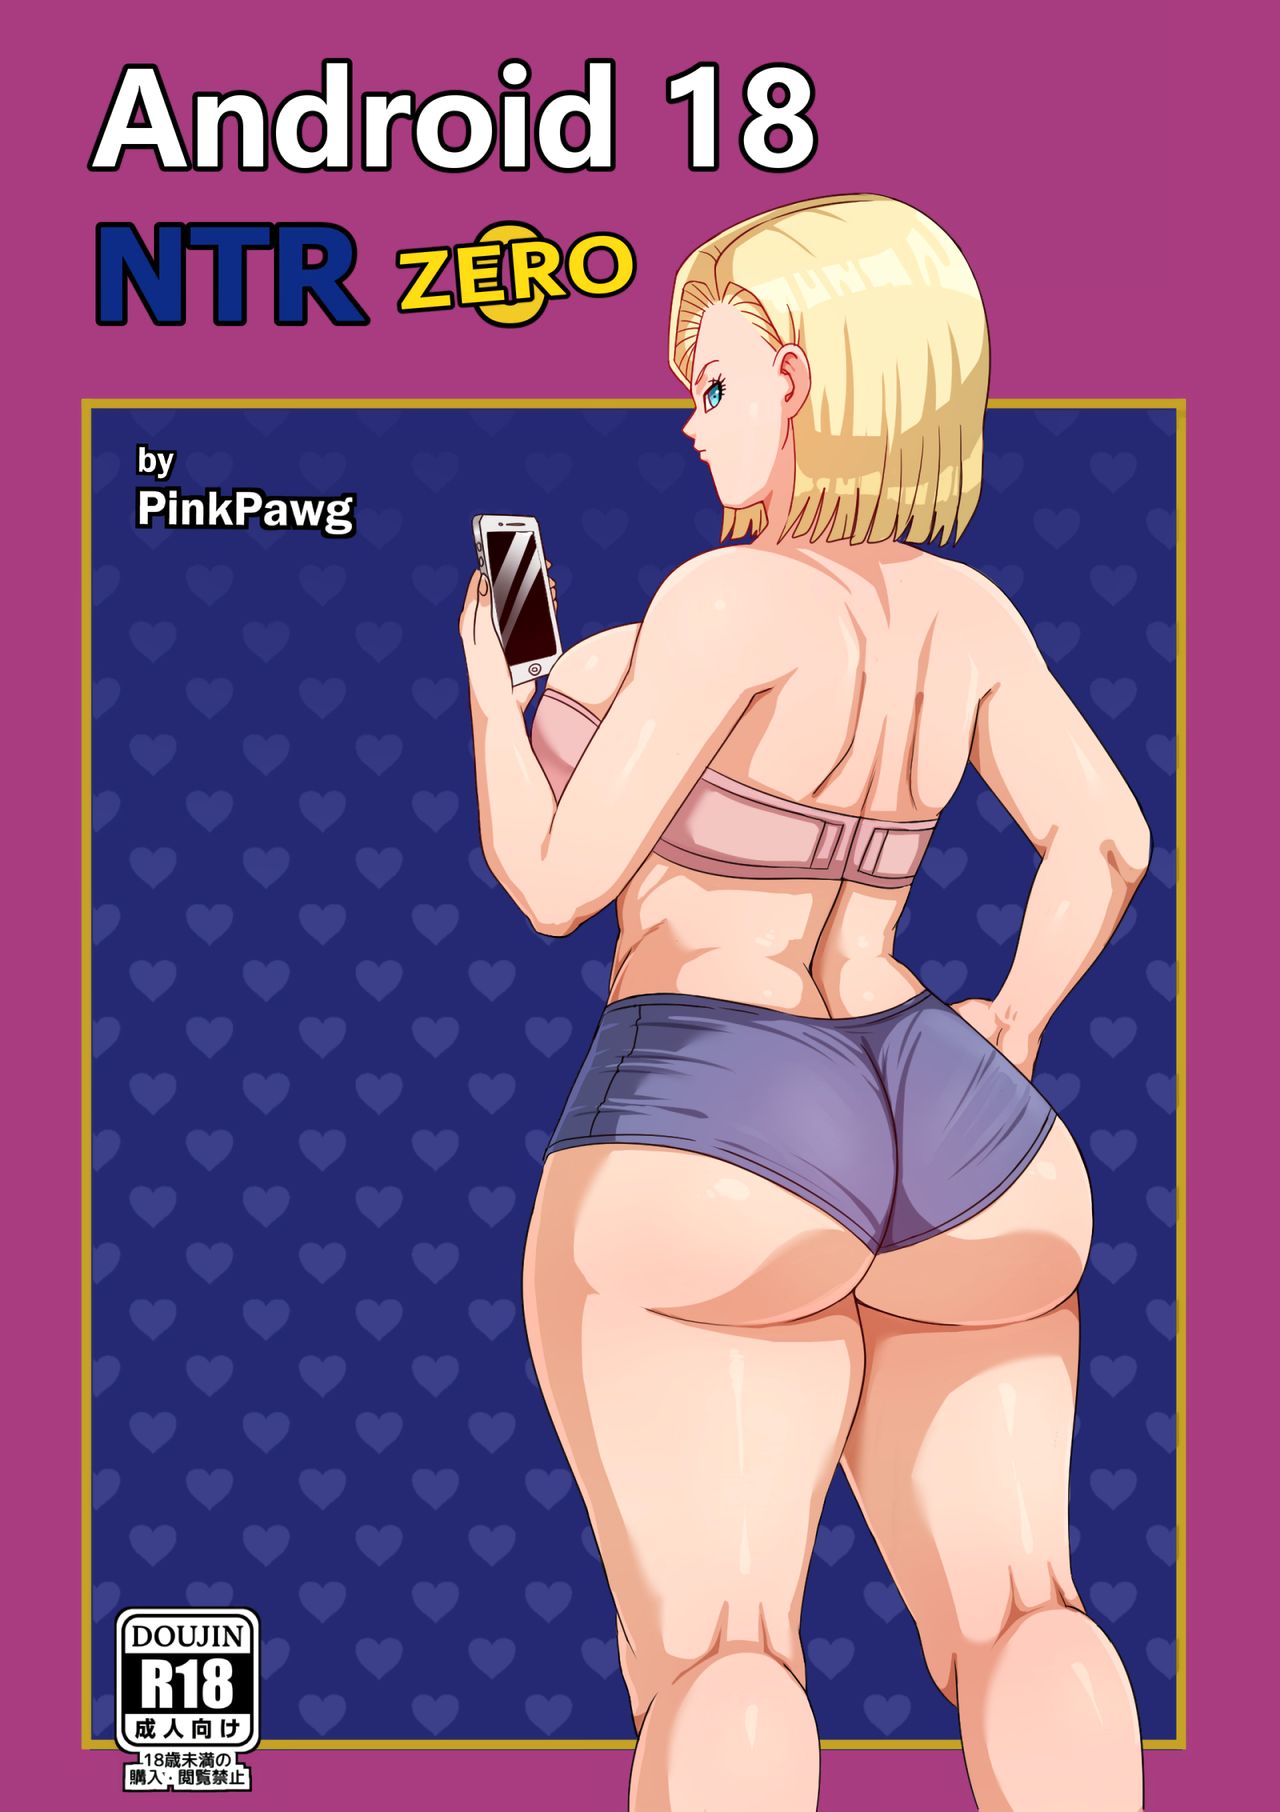 Android 18 Porn Gallery - Android 18 NTR Zero- Pink Pawg (Dragon Ball Super) - Porn Cartoon Comics